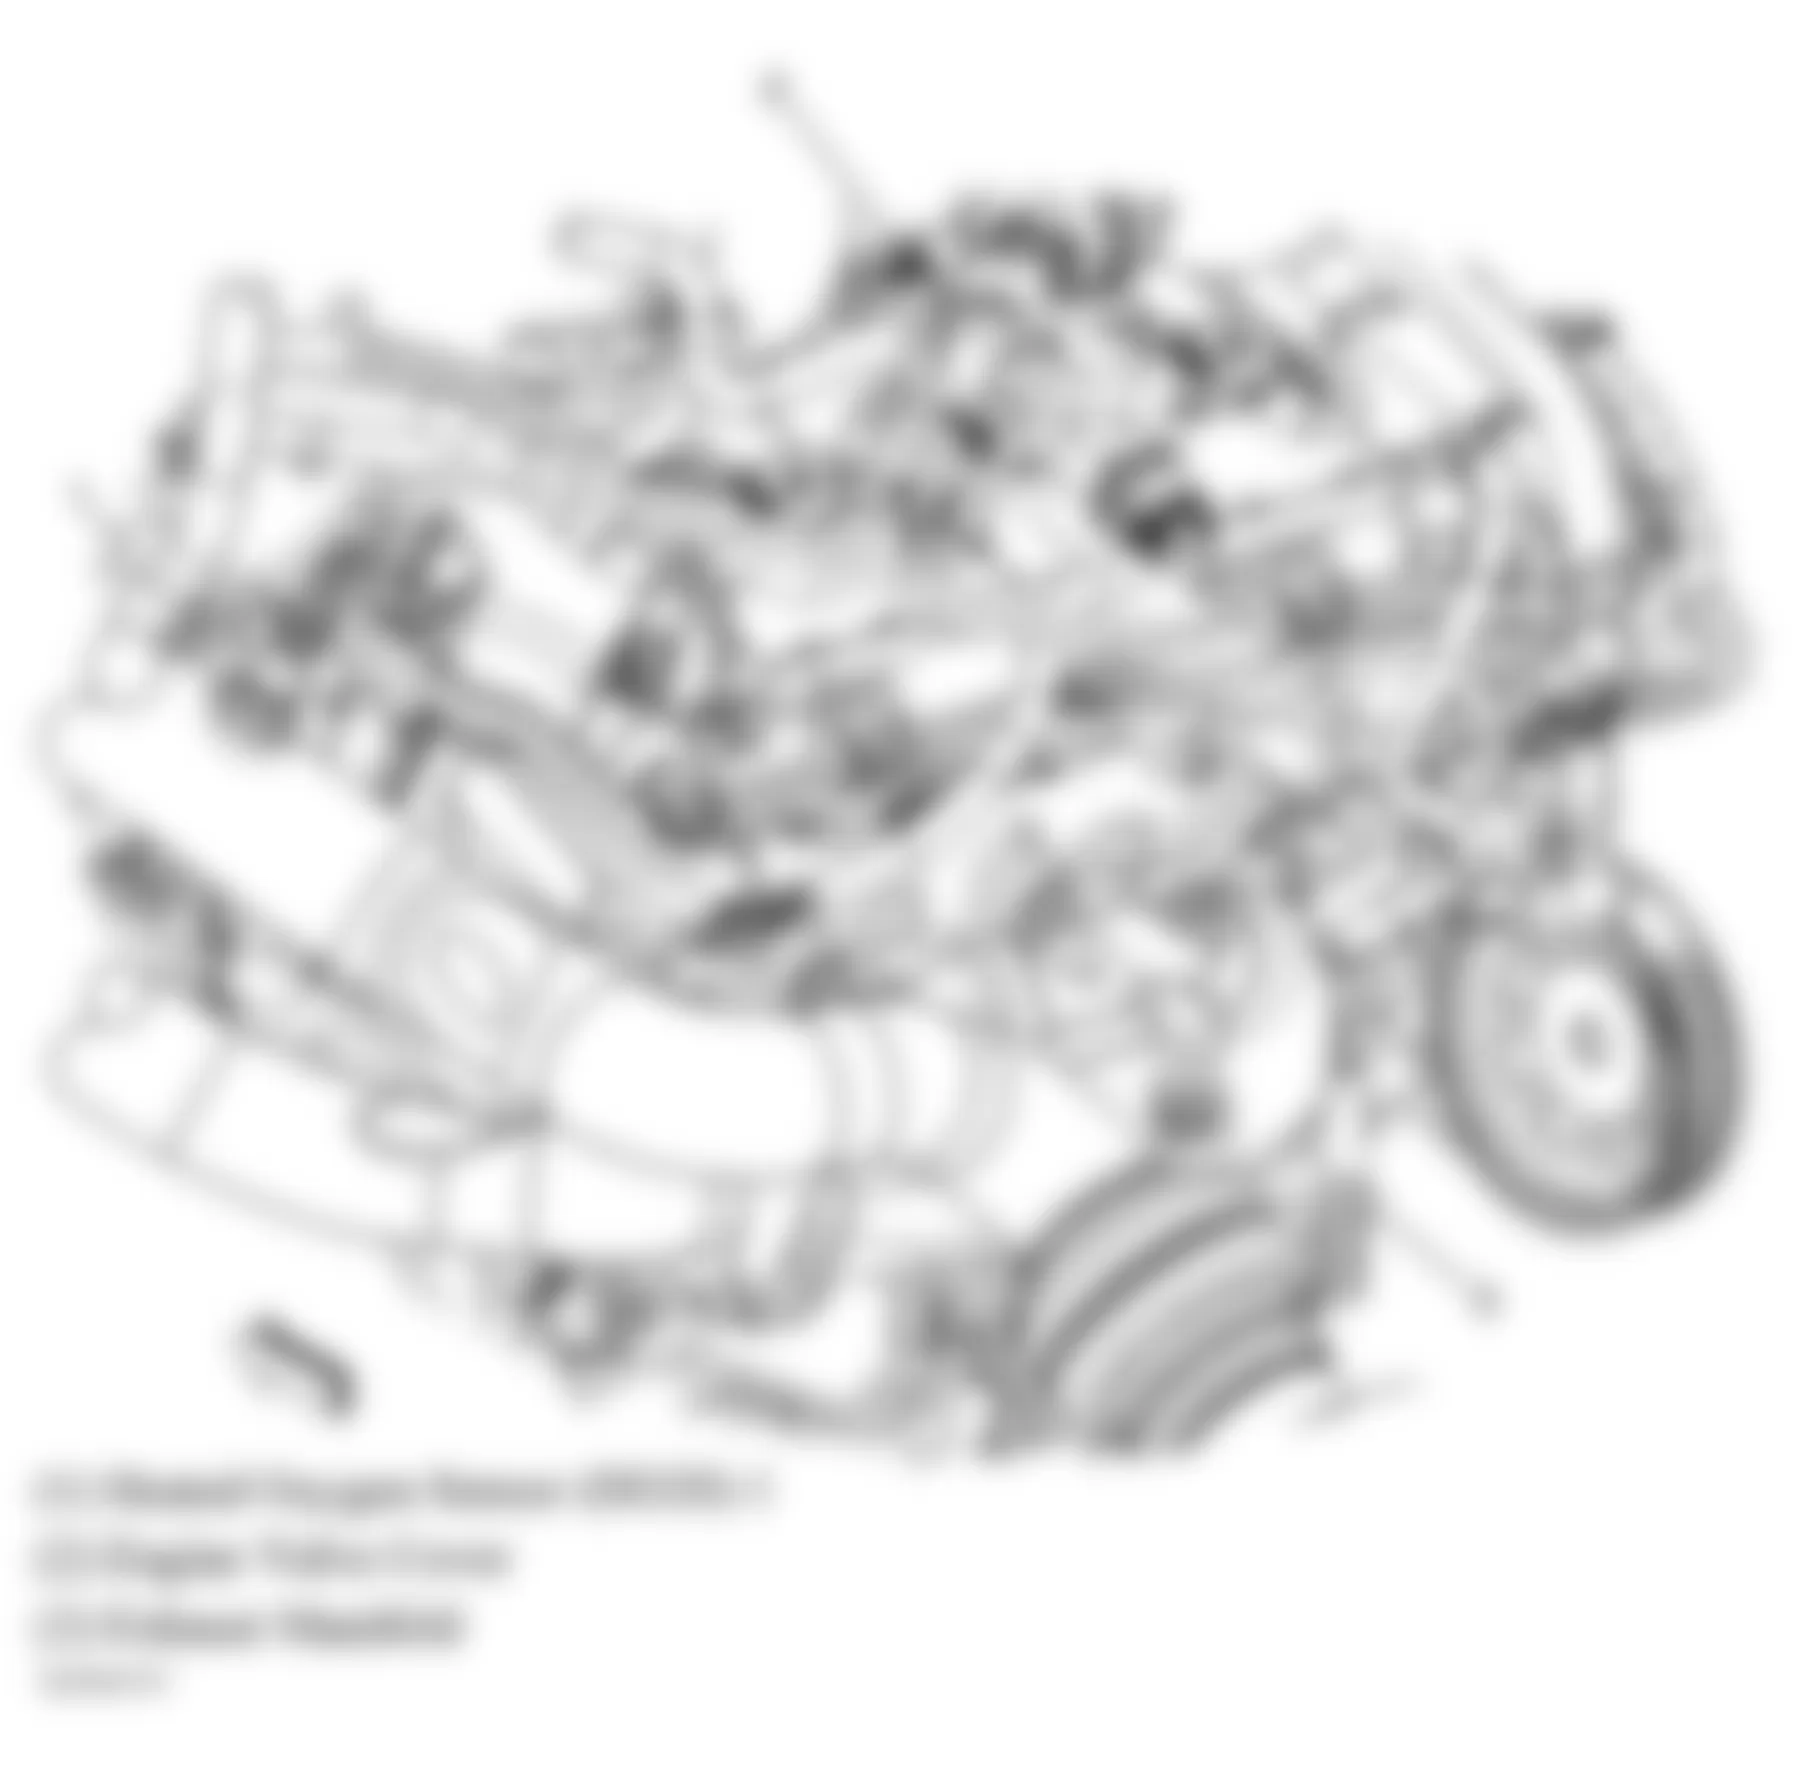 Buick Allure CXL 2005 - Component Locations -  Right Rear Of Engine (3.6L)